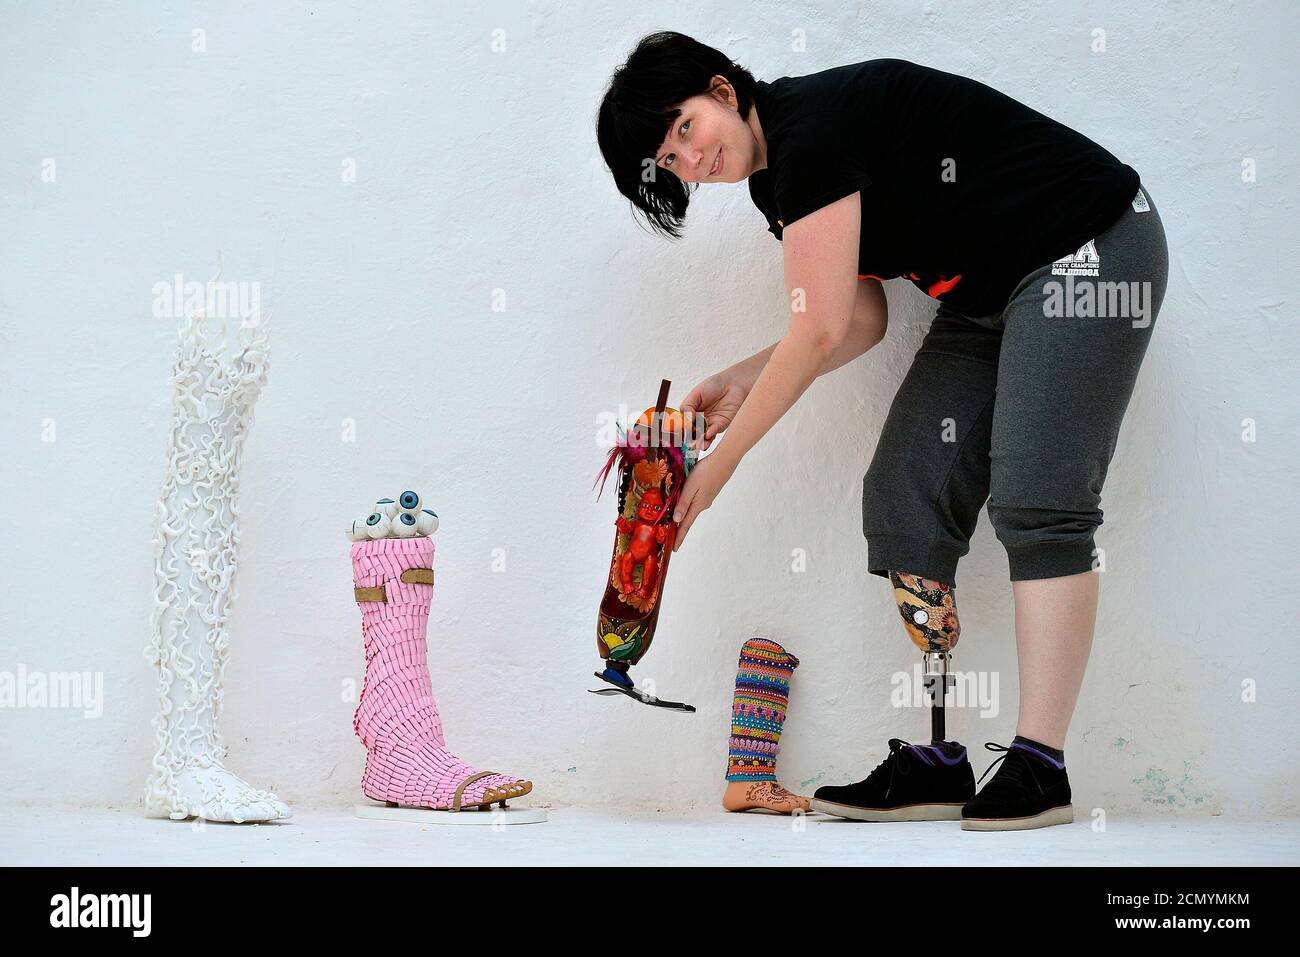 Australian artist and curator Priscilla Sutton arranges pieces for her show 'Spare Parts' at The Rag Factory in London August 24, 2012. The exhibition comprises of prosthetic limbs  - donated by owners no longer using them - and then transformed into pieces of art, and is being held to coincide with the London 2012 Paralympics. REUTERS/Toby Melville (BRITAIN - Tags: ENTERTAINMENT HEALTH SPORT OLYMPICS) Stock Photo